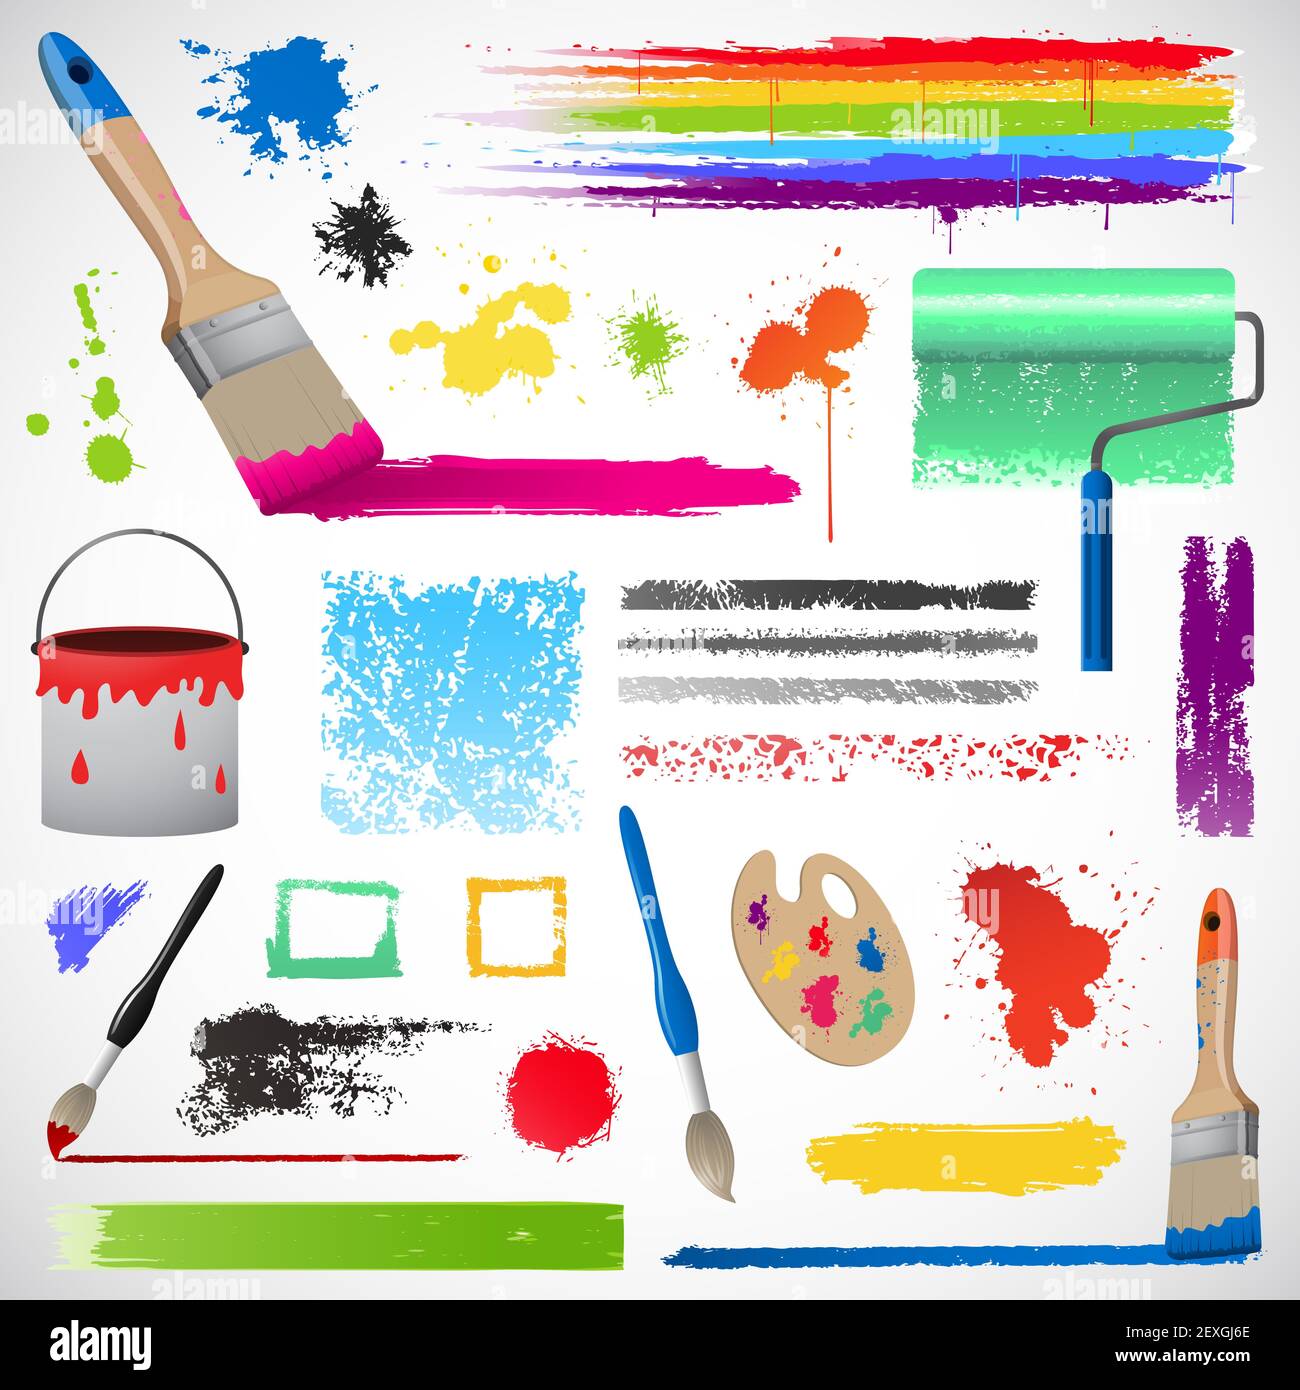 Painting and paint splats elements Stock Photo